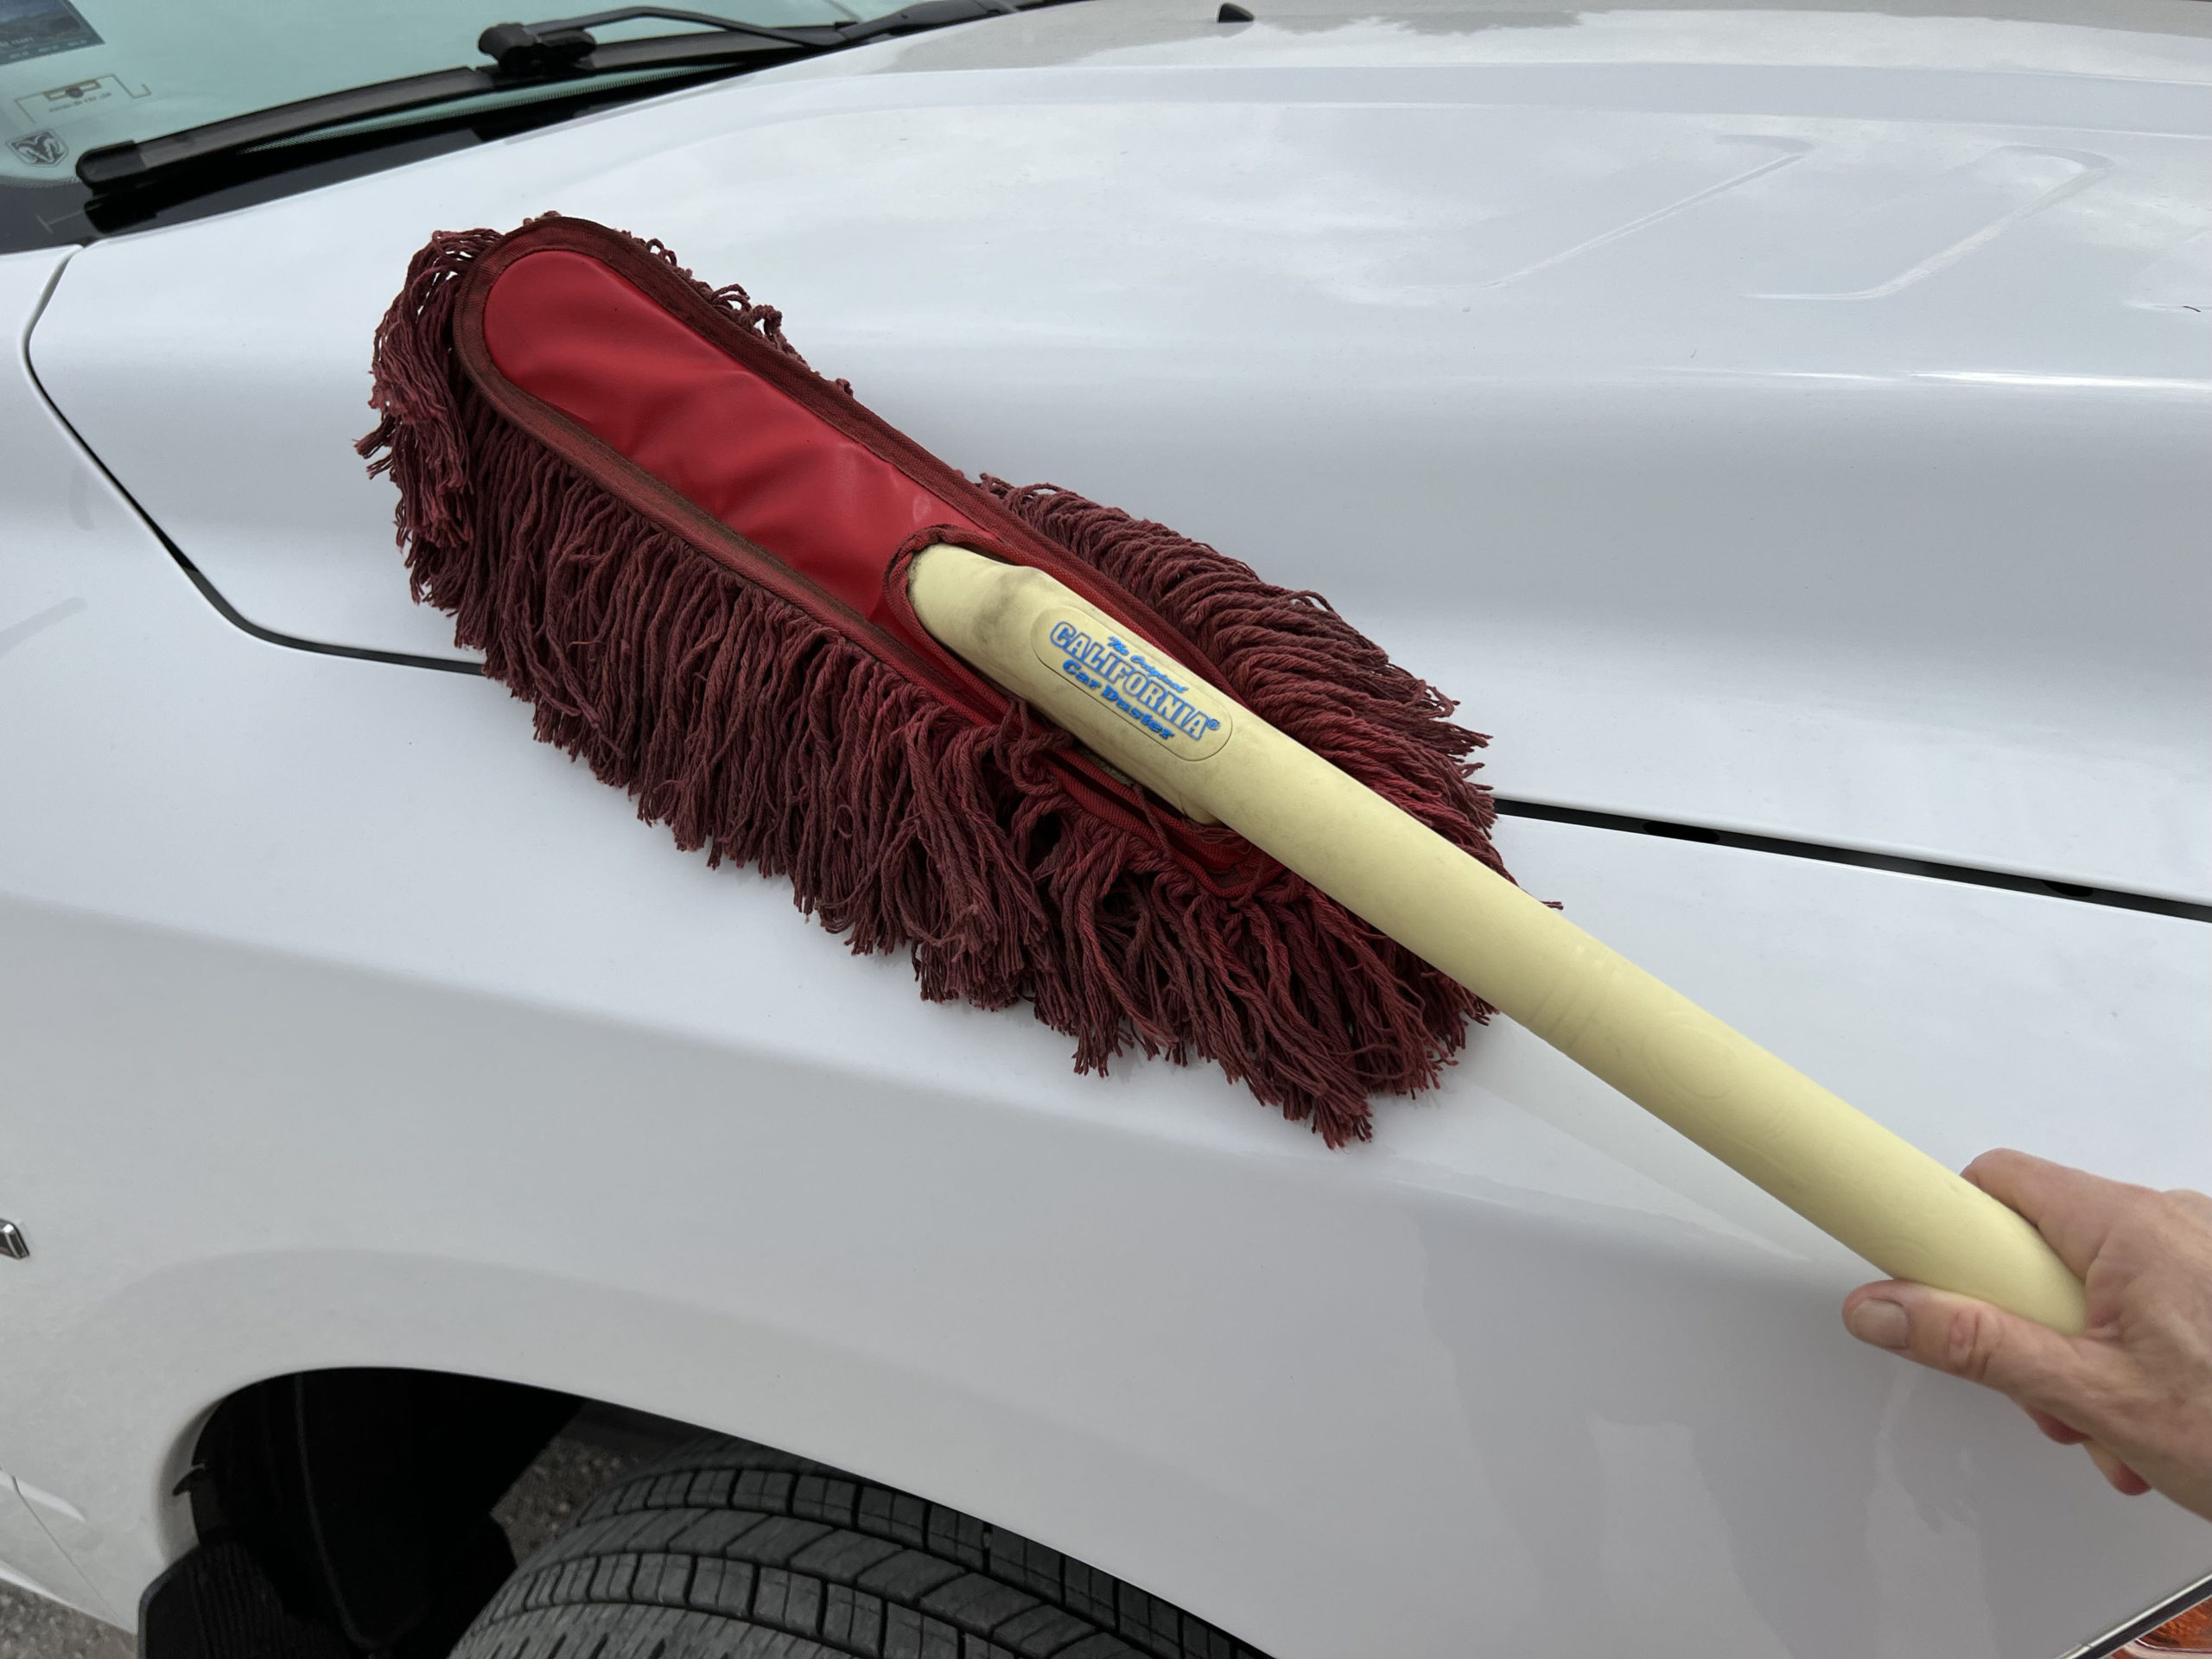 technician uses an original California Car Duster to wipe the surface of a car